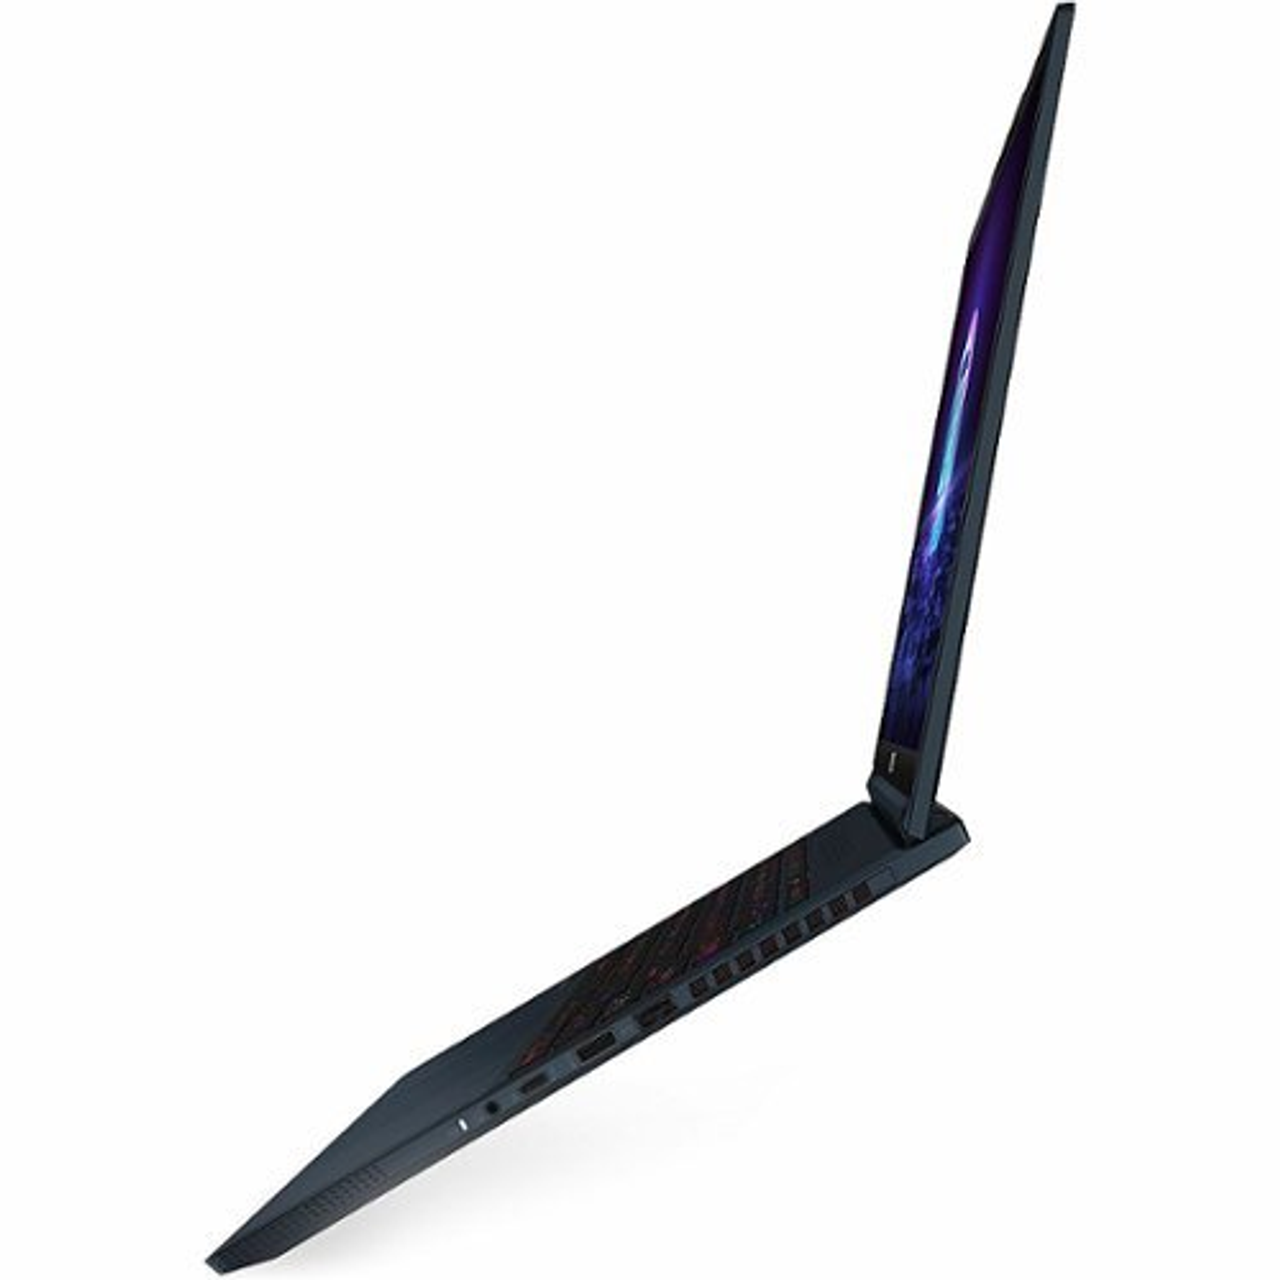 MSI - Stealth 16 AI Studio A1V 16" 120 Hz Gaming Laptop 3840 x 2400 (UHD+) - Intel Core Ultra 9 185H with 64GB Memory - Star Blue, Blue